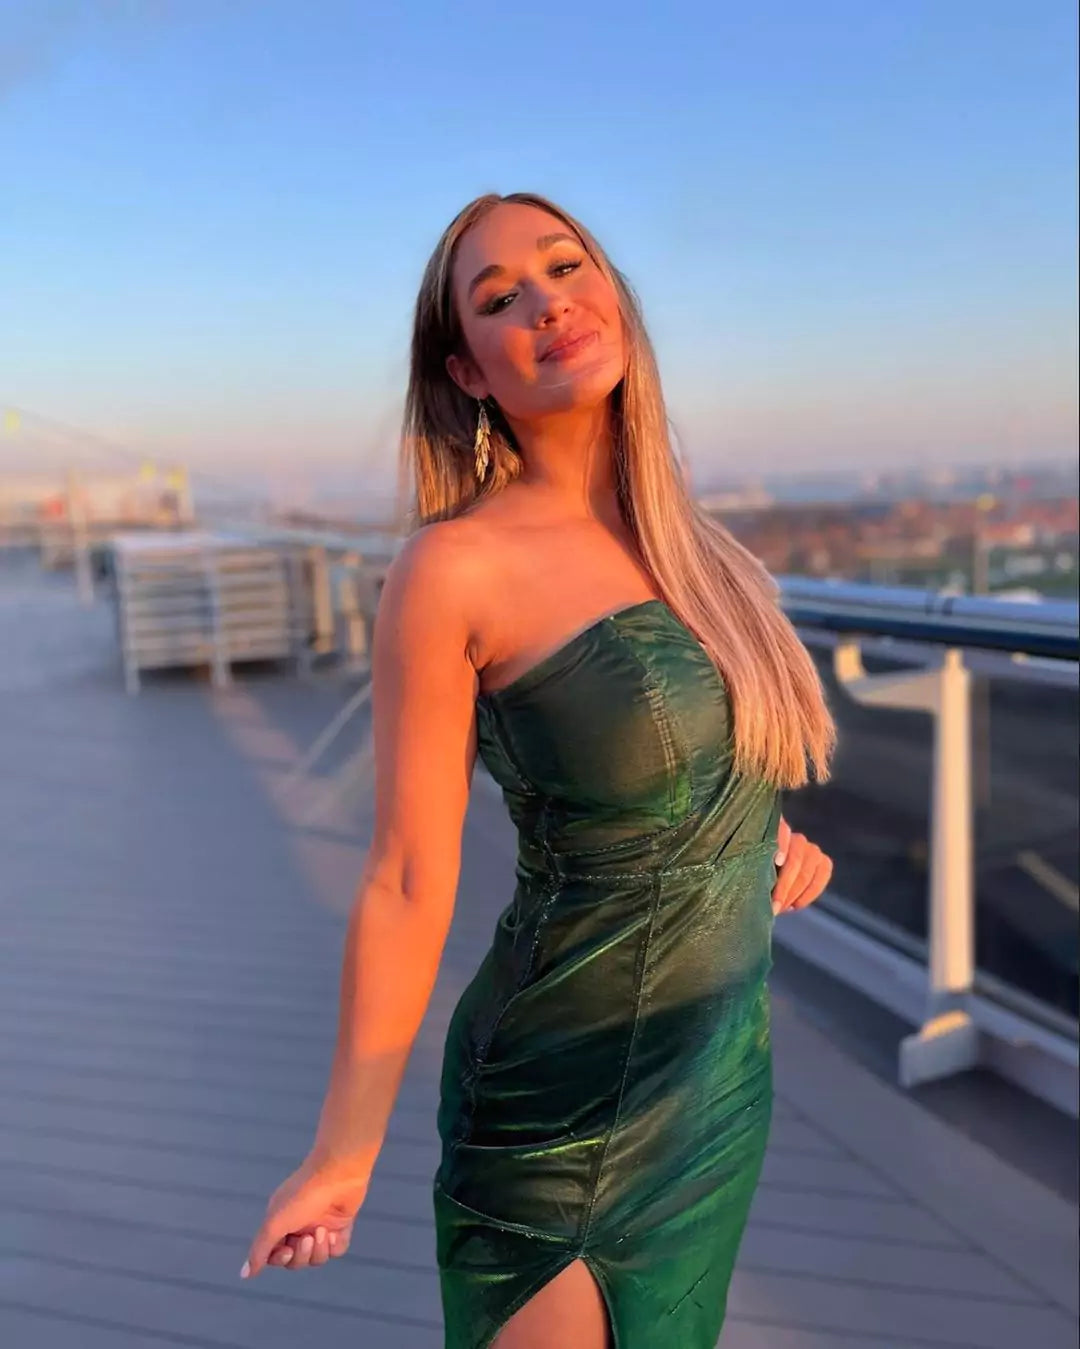 A woman in a green dress posing on a rooftop.